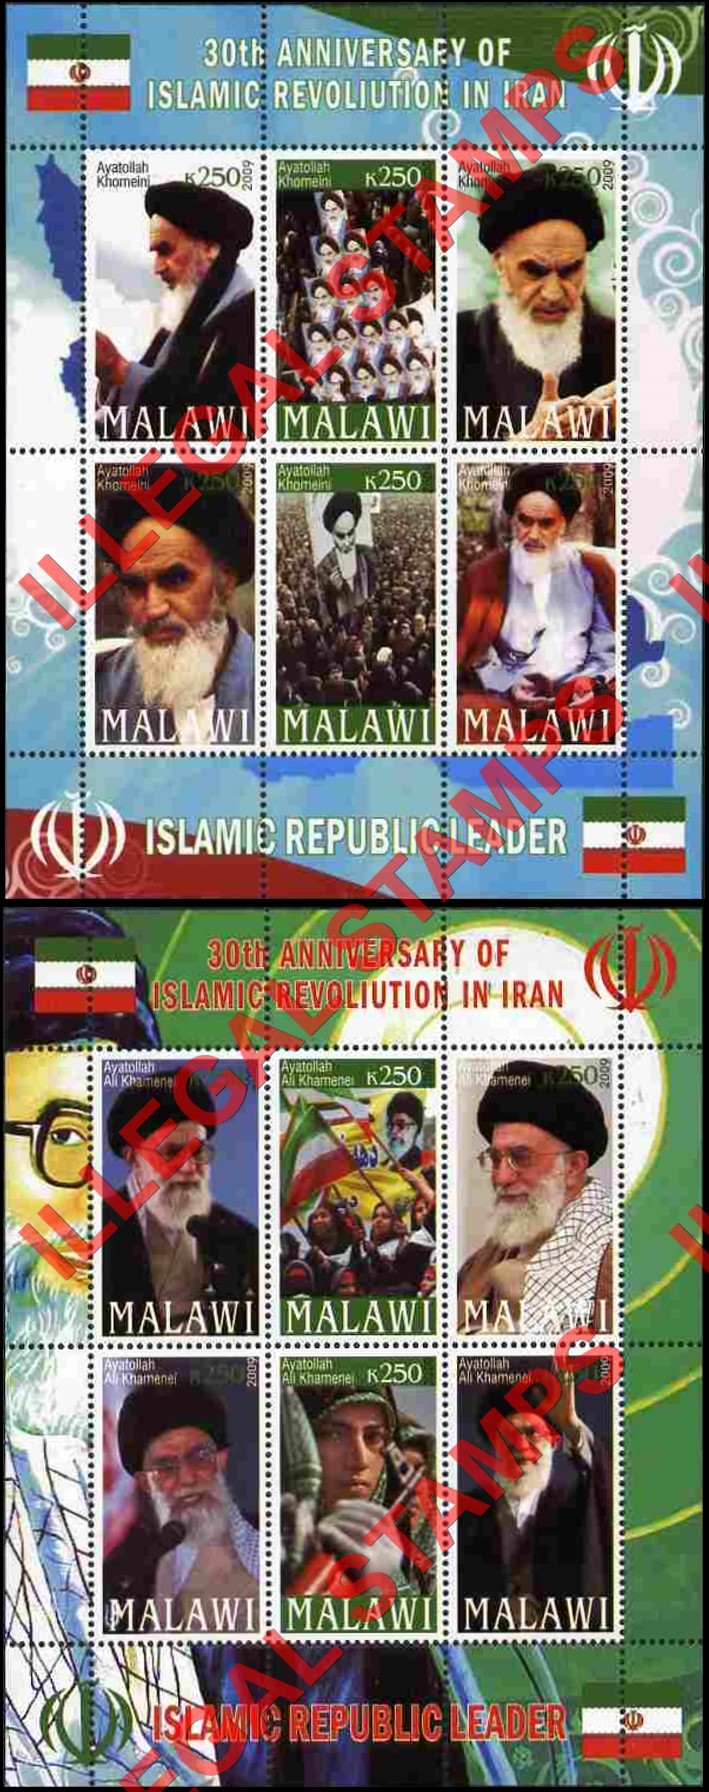 Malawi 2009 Islamic Revolution in Iran Illegal Stamp Souvenir Sheets of 6 (Part 1)